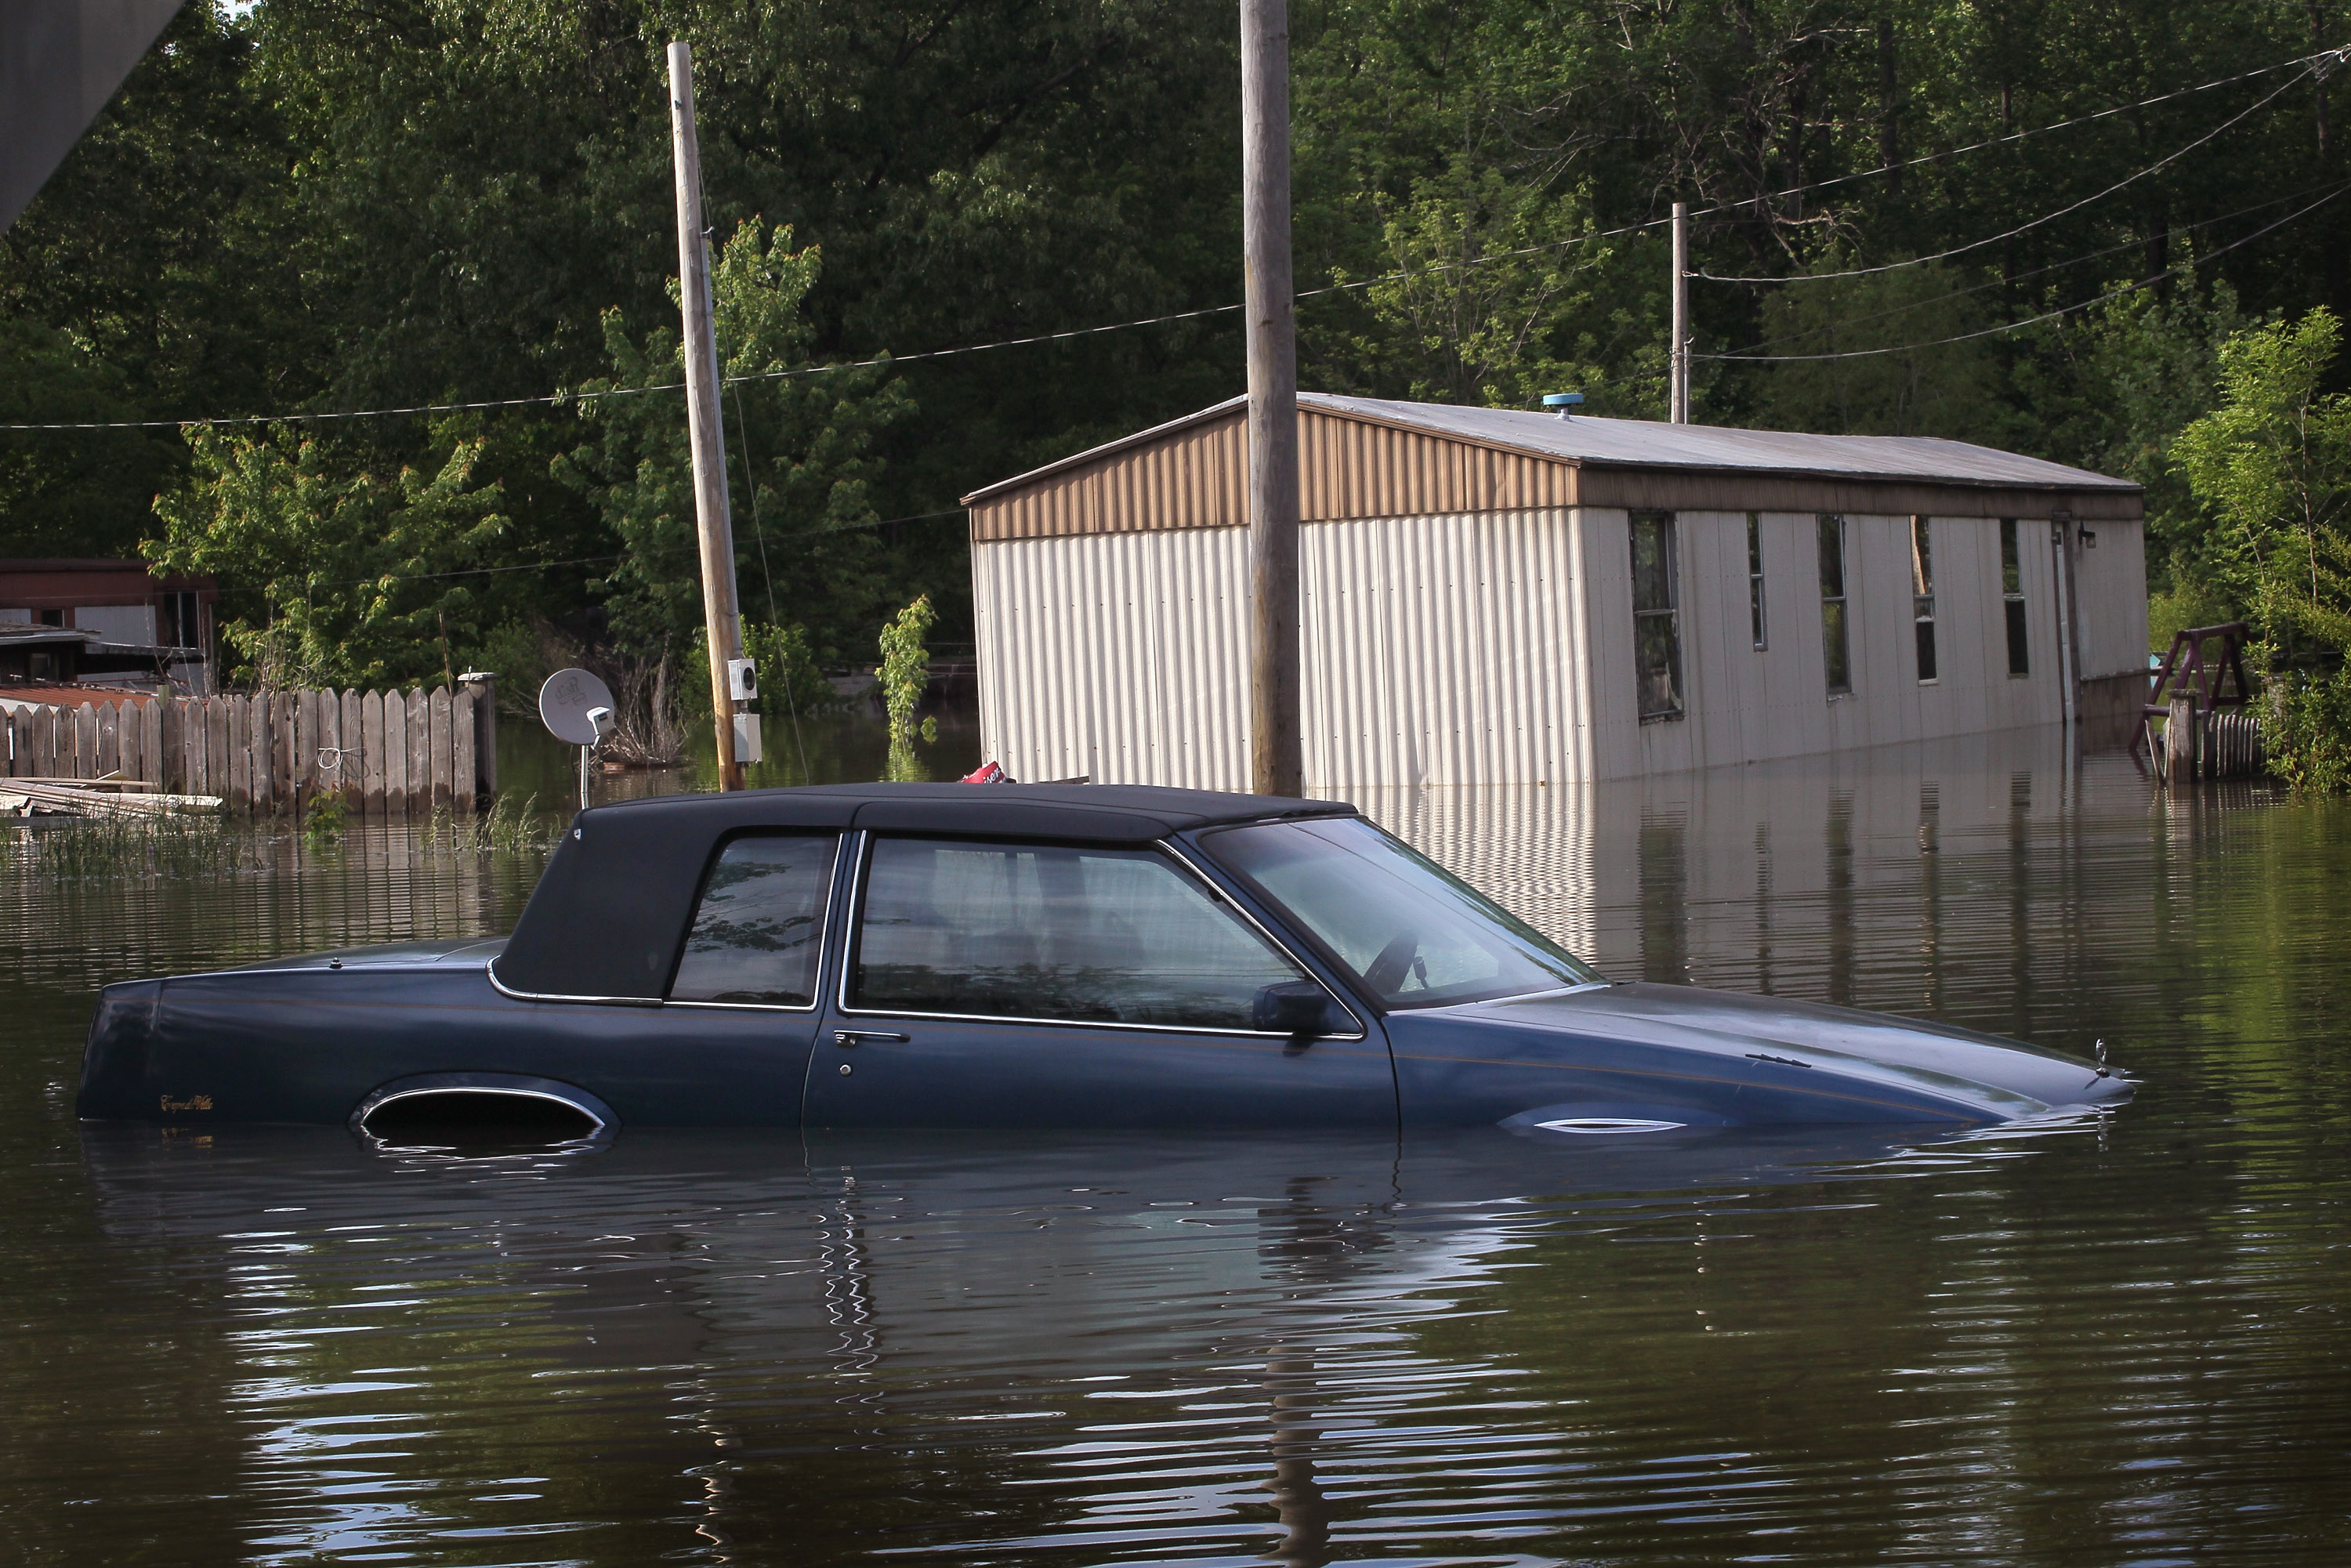 Kentucky Residents Share Images of Flash Floods Destroying Homes, Schools